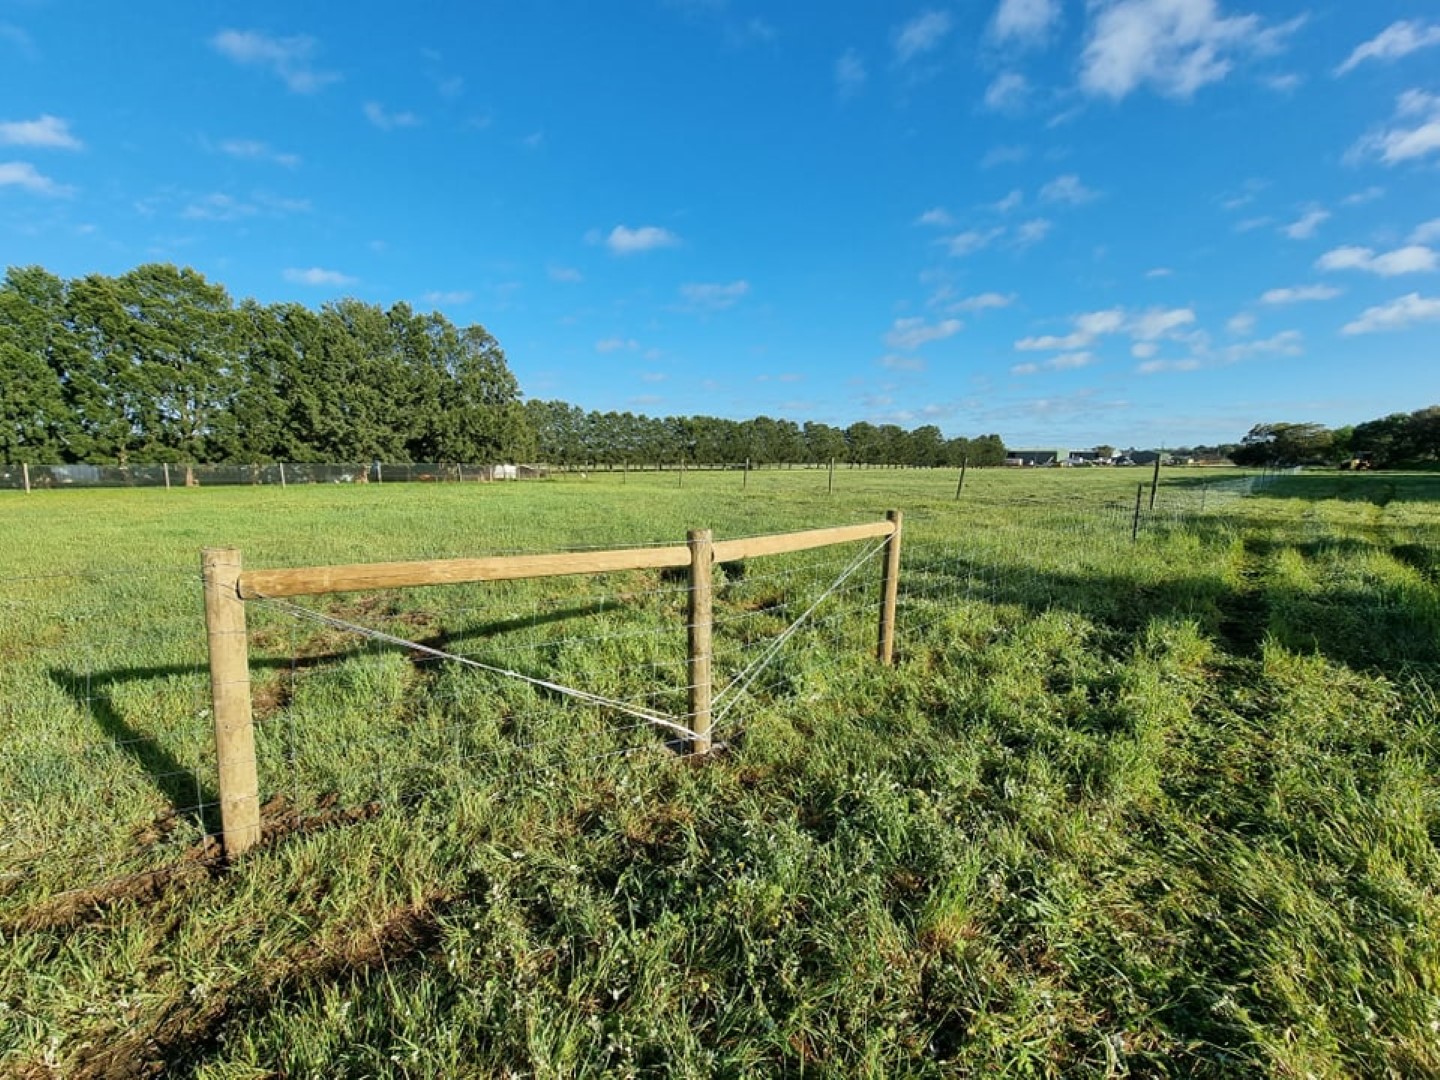 Fence in rural area